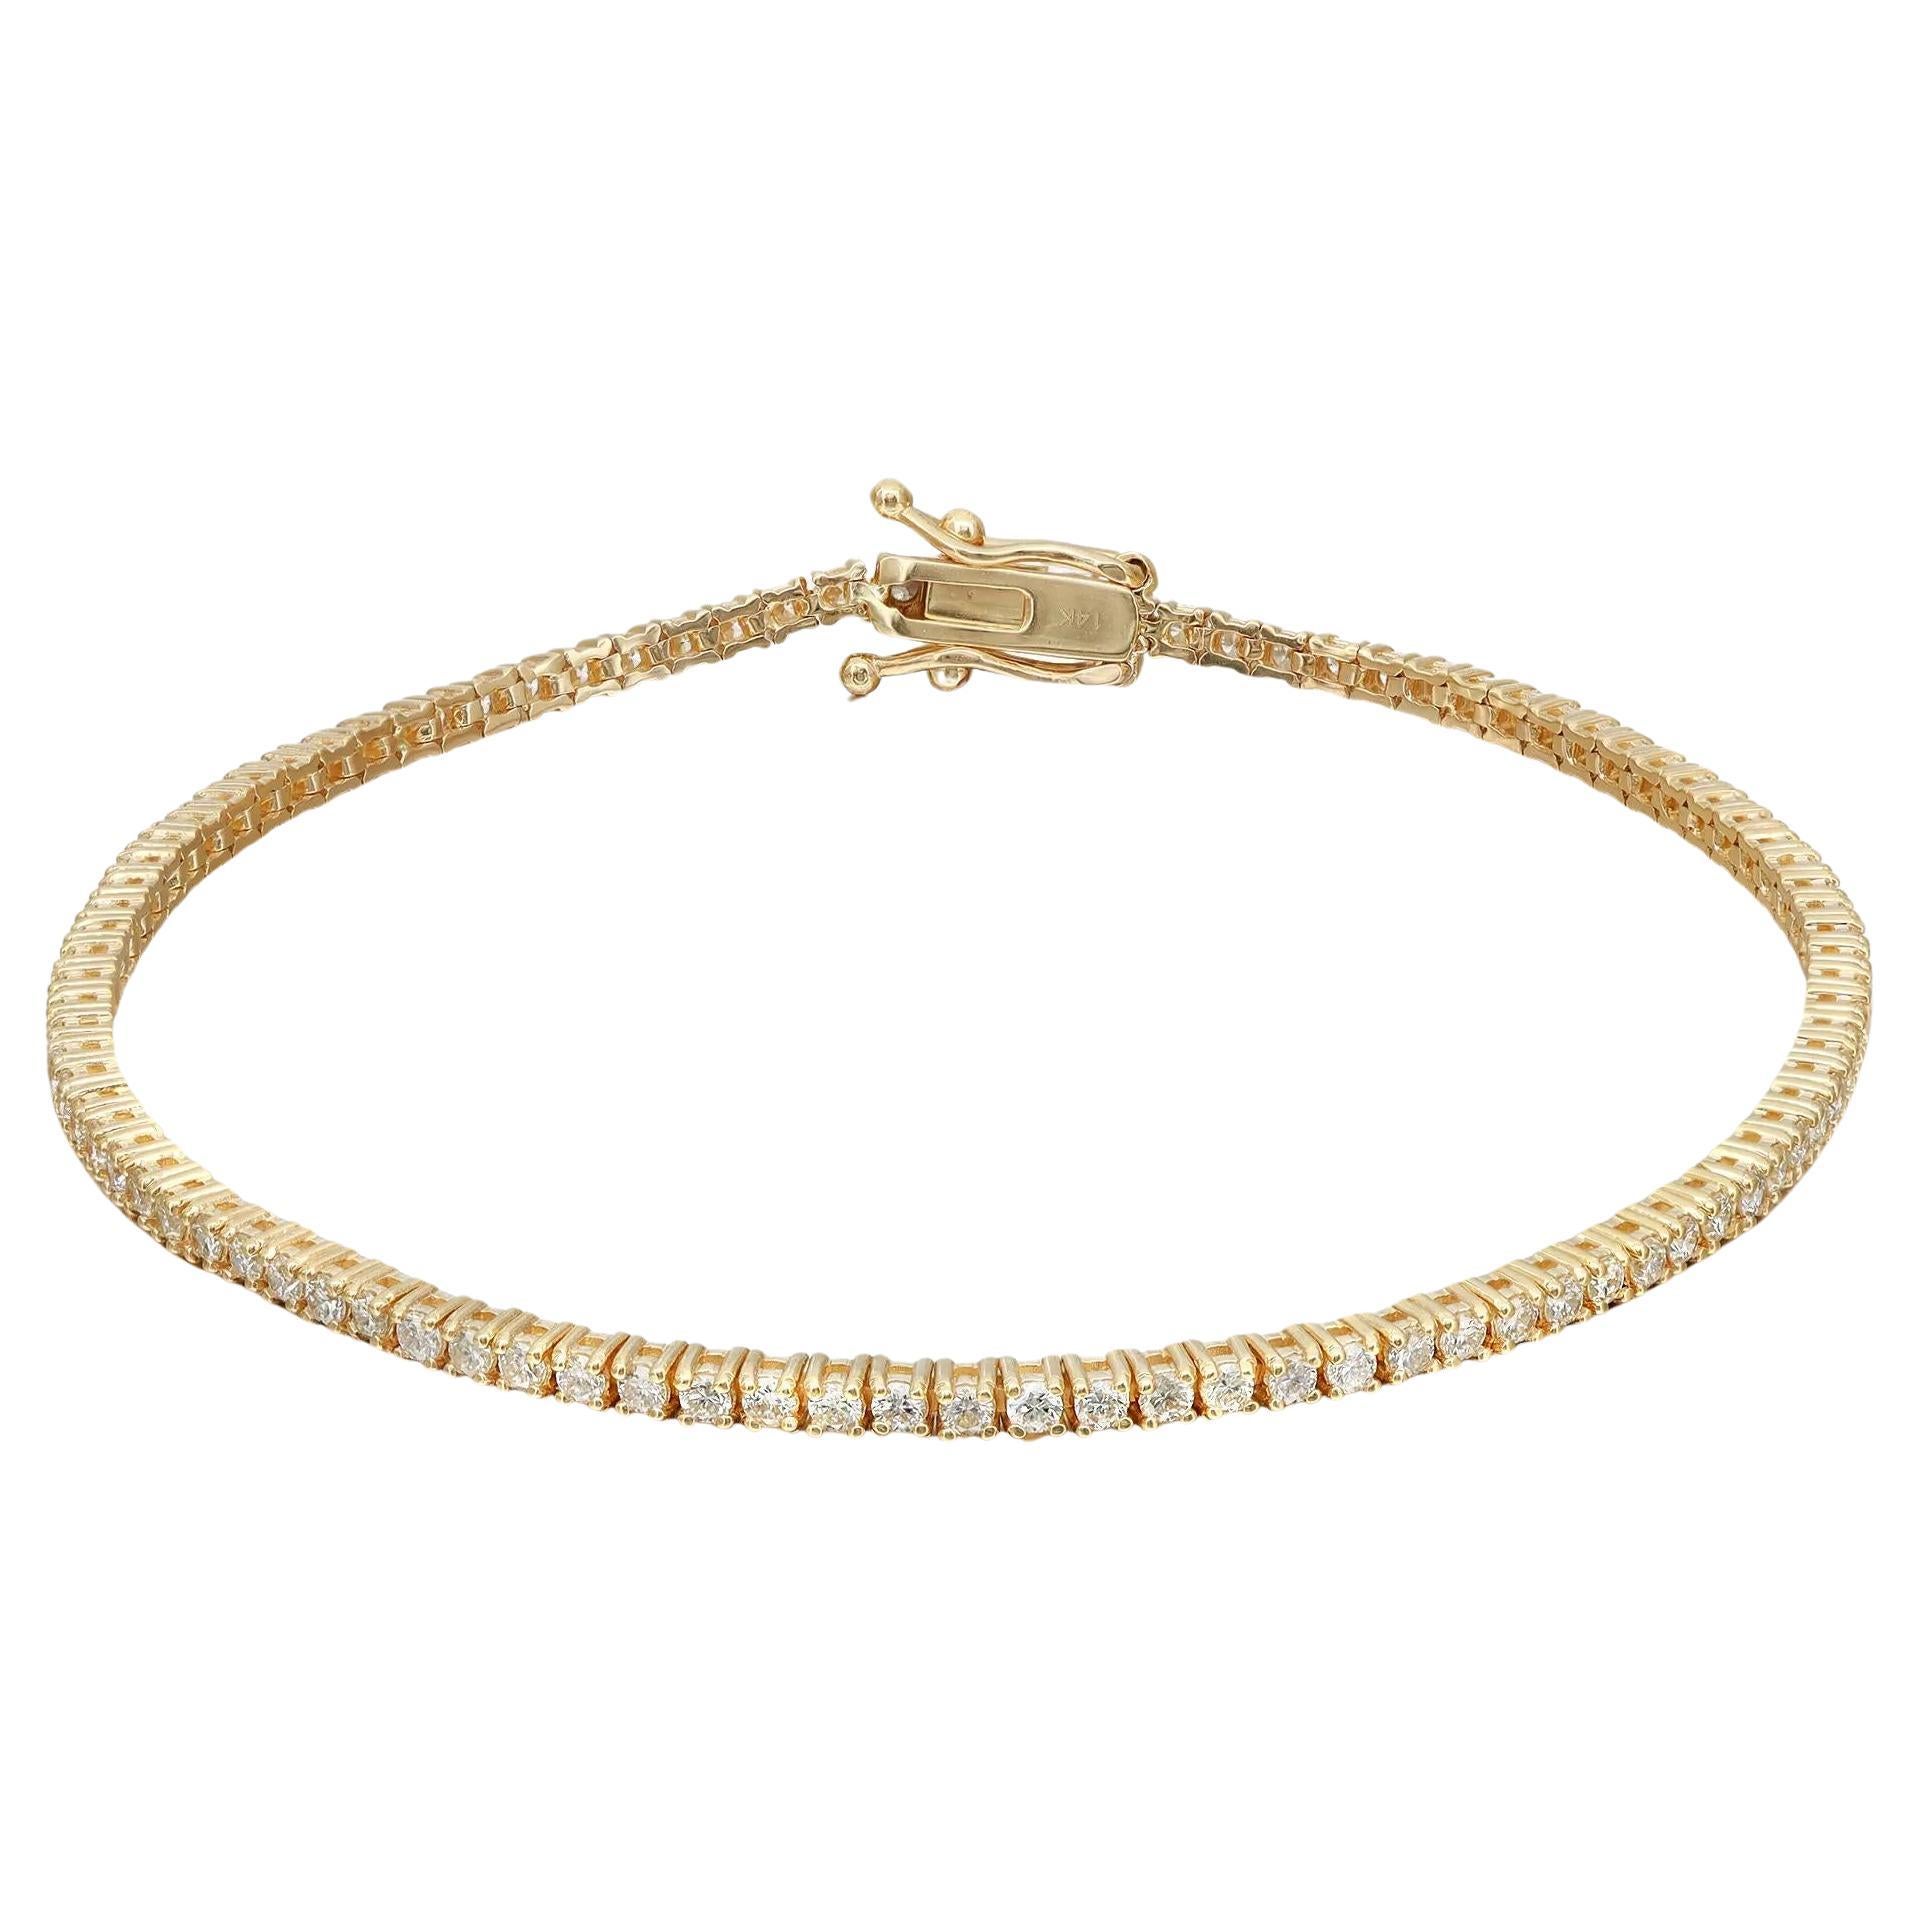 Prong Set Round Diamond Tennis Bracelet 14K Yellow Gold 0.95Cttw 7 Inches For Sale